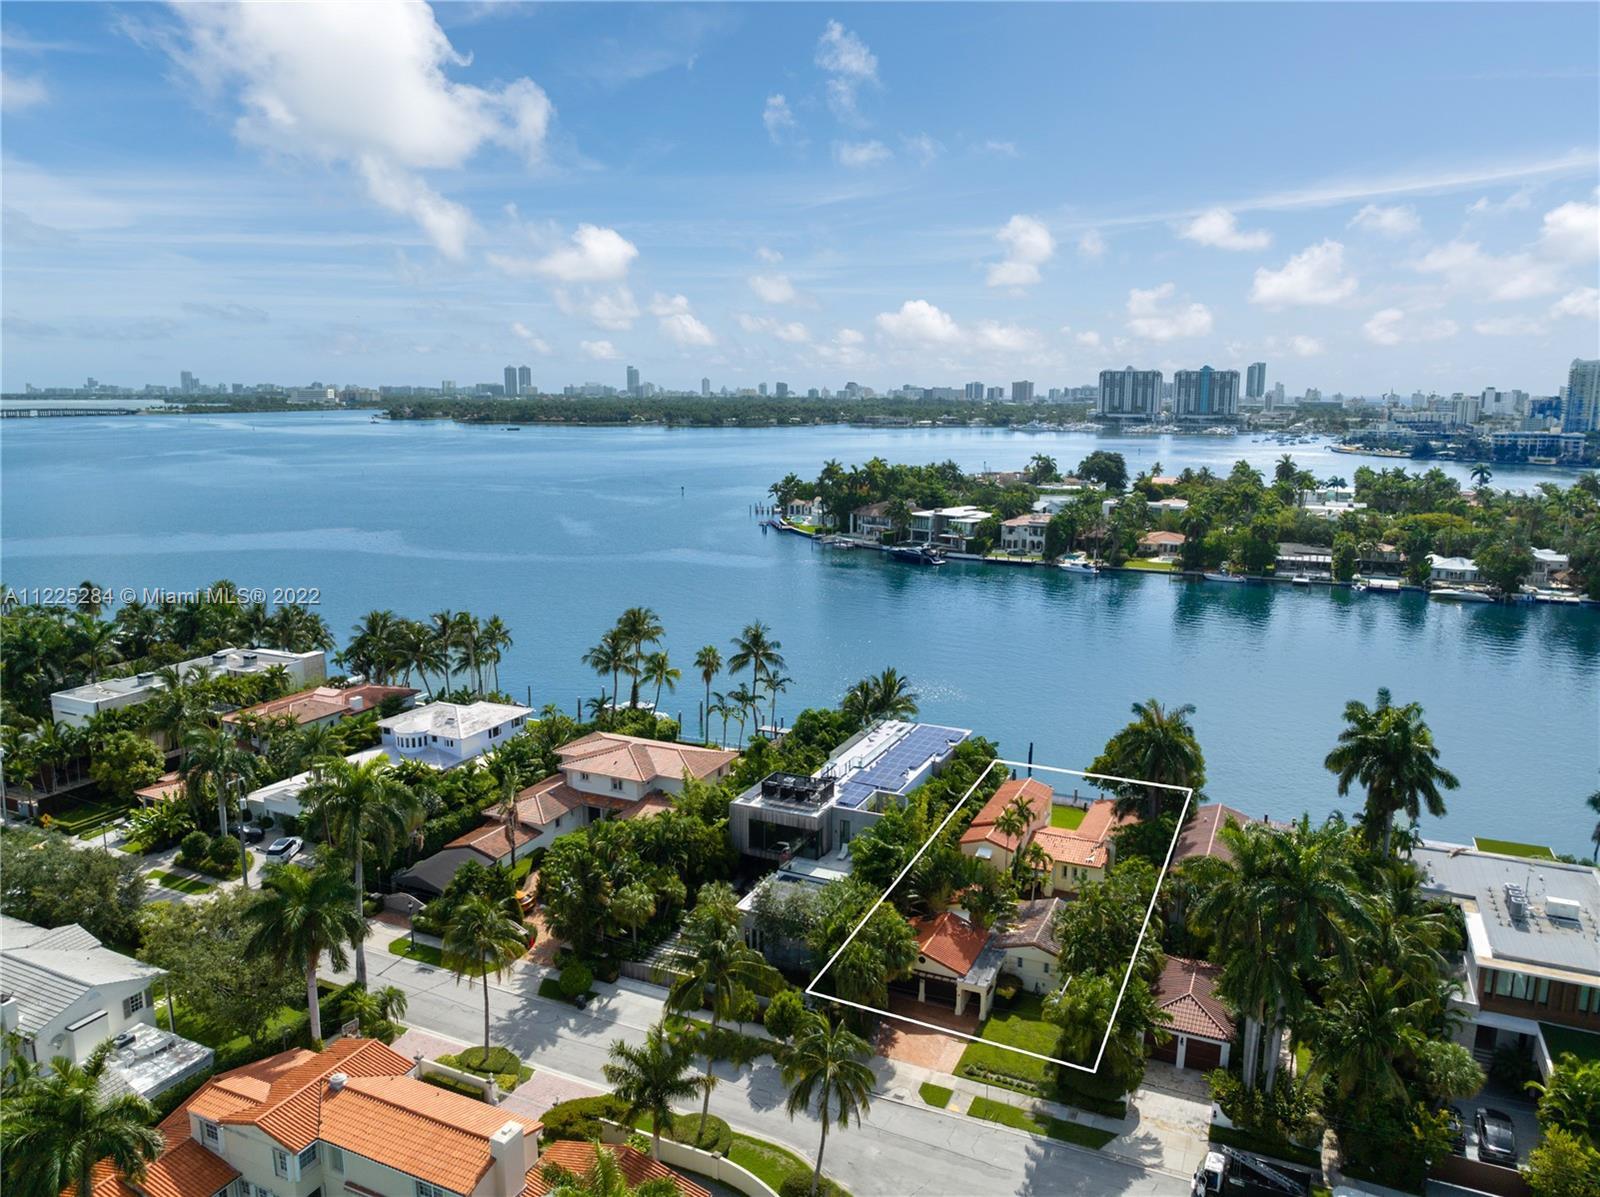 Introducing the lowest priced waterfront property on the Venetian Islands! This East facing cottage 